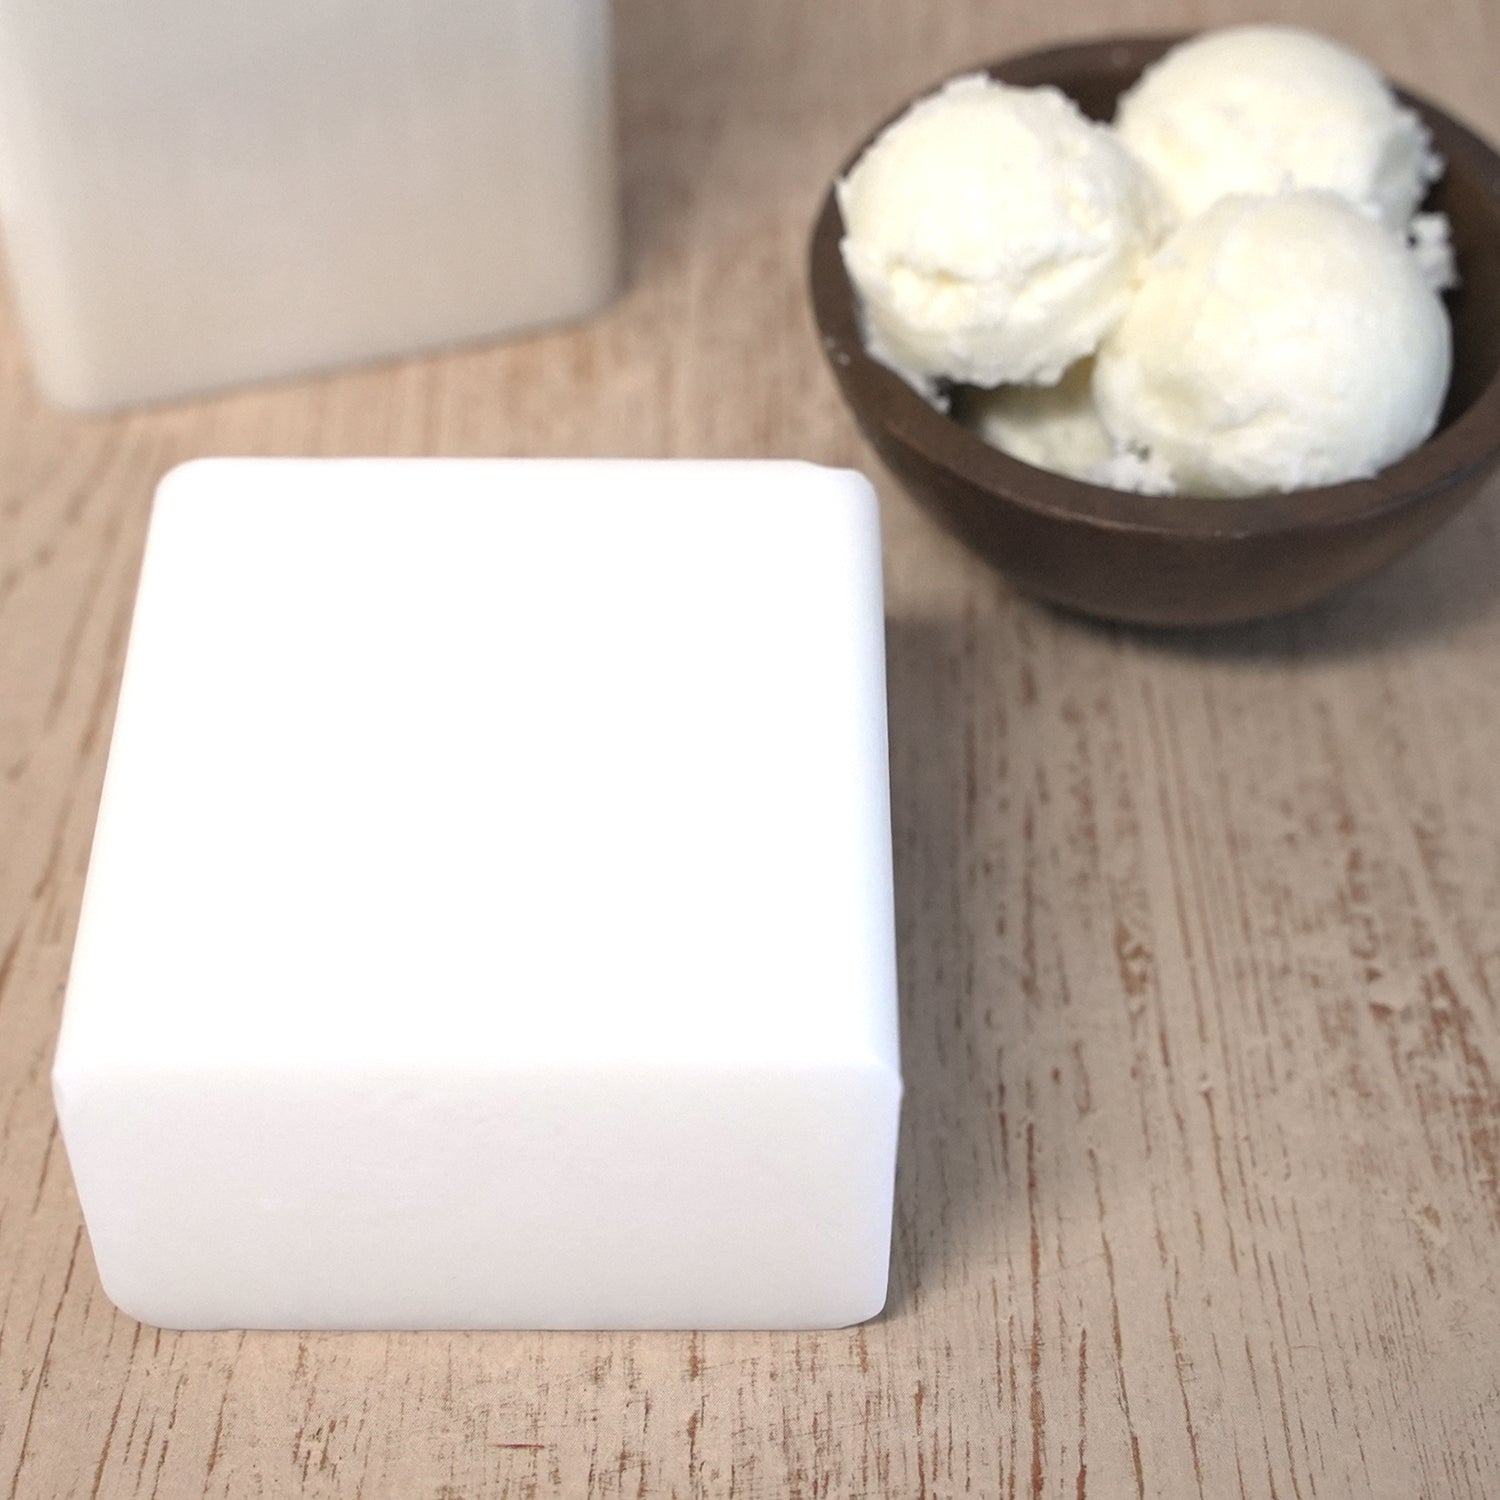 Shea Butter Melt and Pour Block Soap Base from